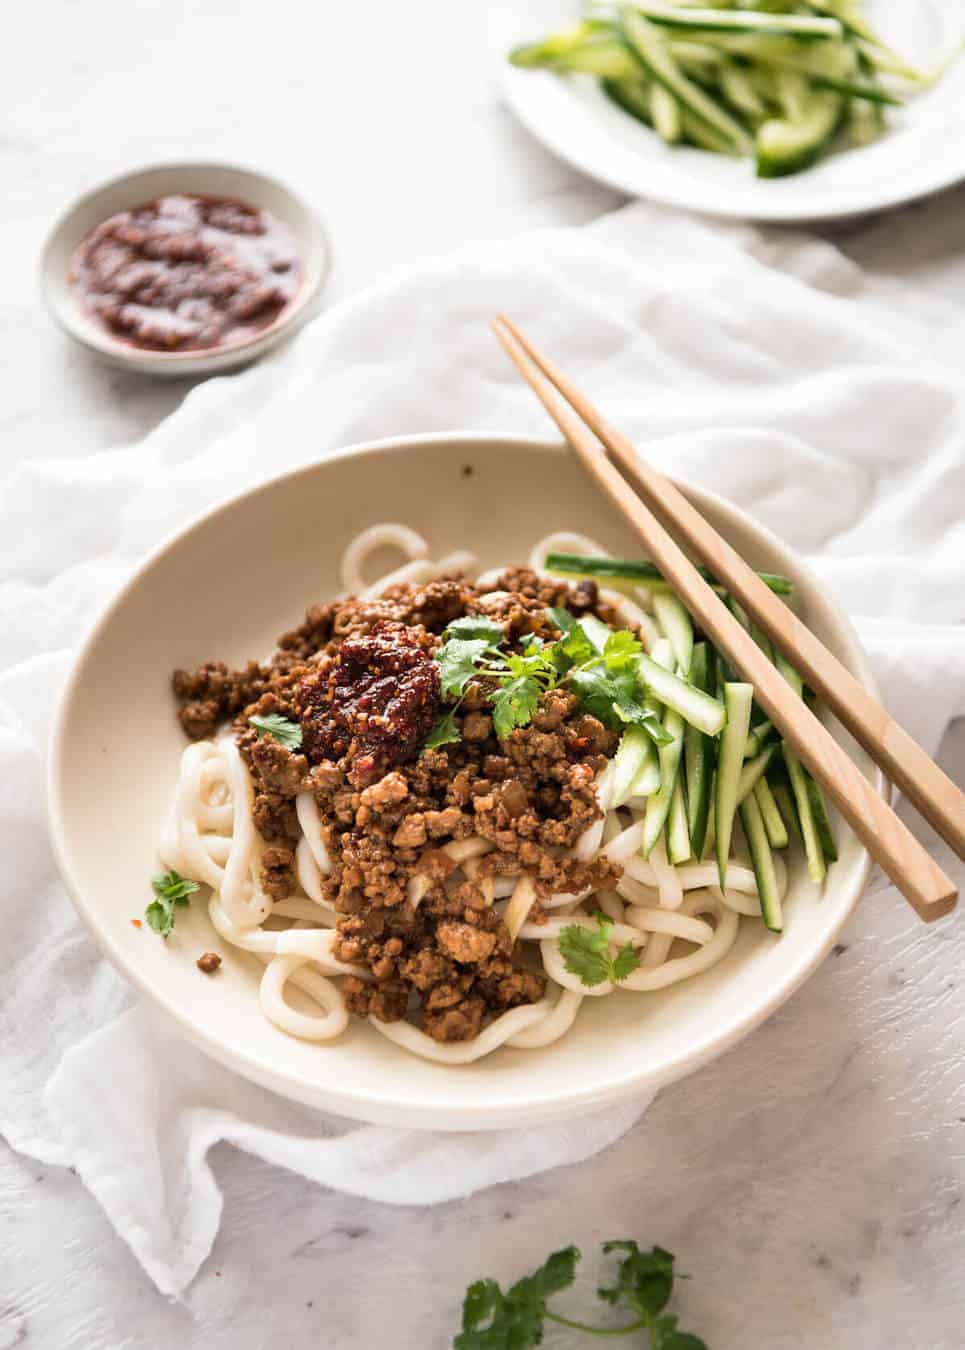 Chinese Pork Mince with Noodles (Zha Jiang Mian) - Super quick and super tasty, affectionally known as "Chinese Bolognese". The pork is savoury with a touch of heat and spice, perfect mixed through noodles! www.recipetineats.com